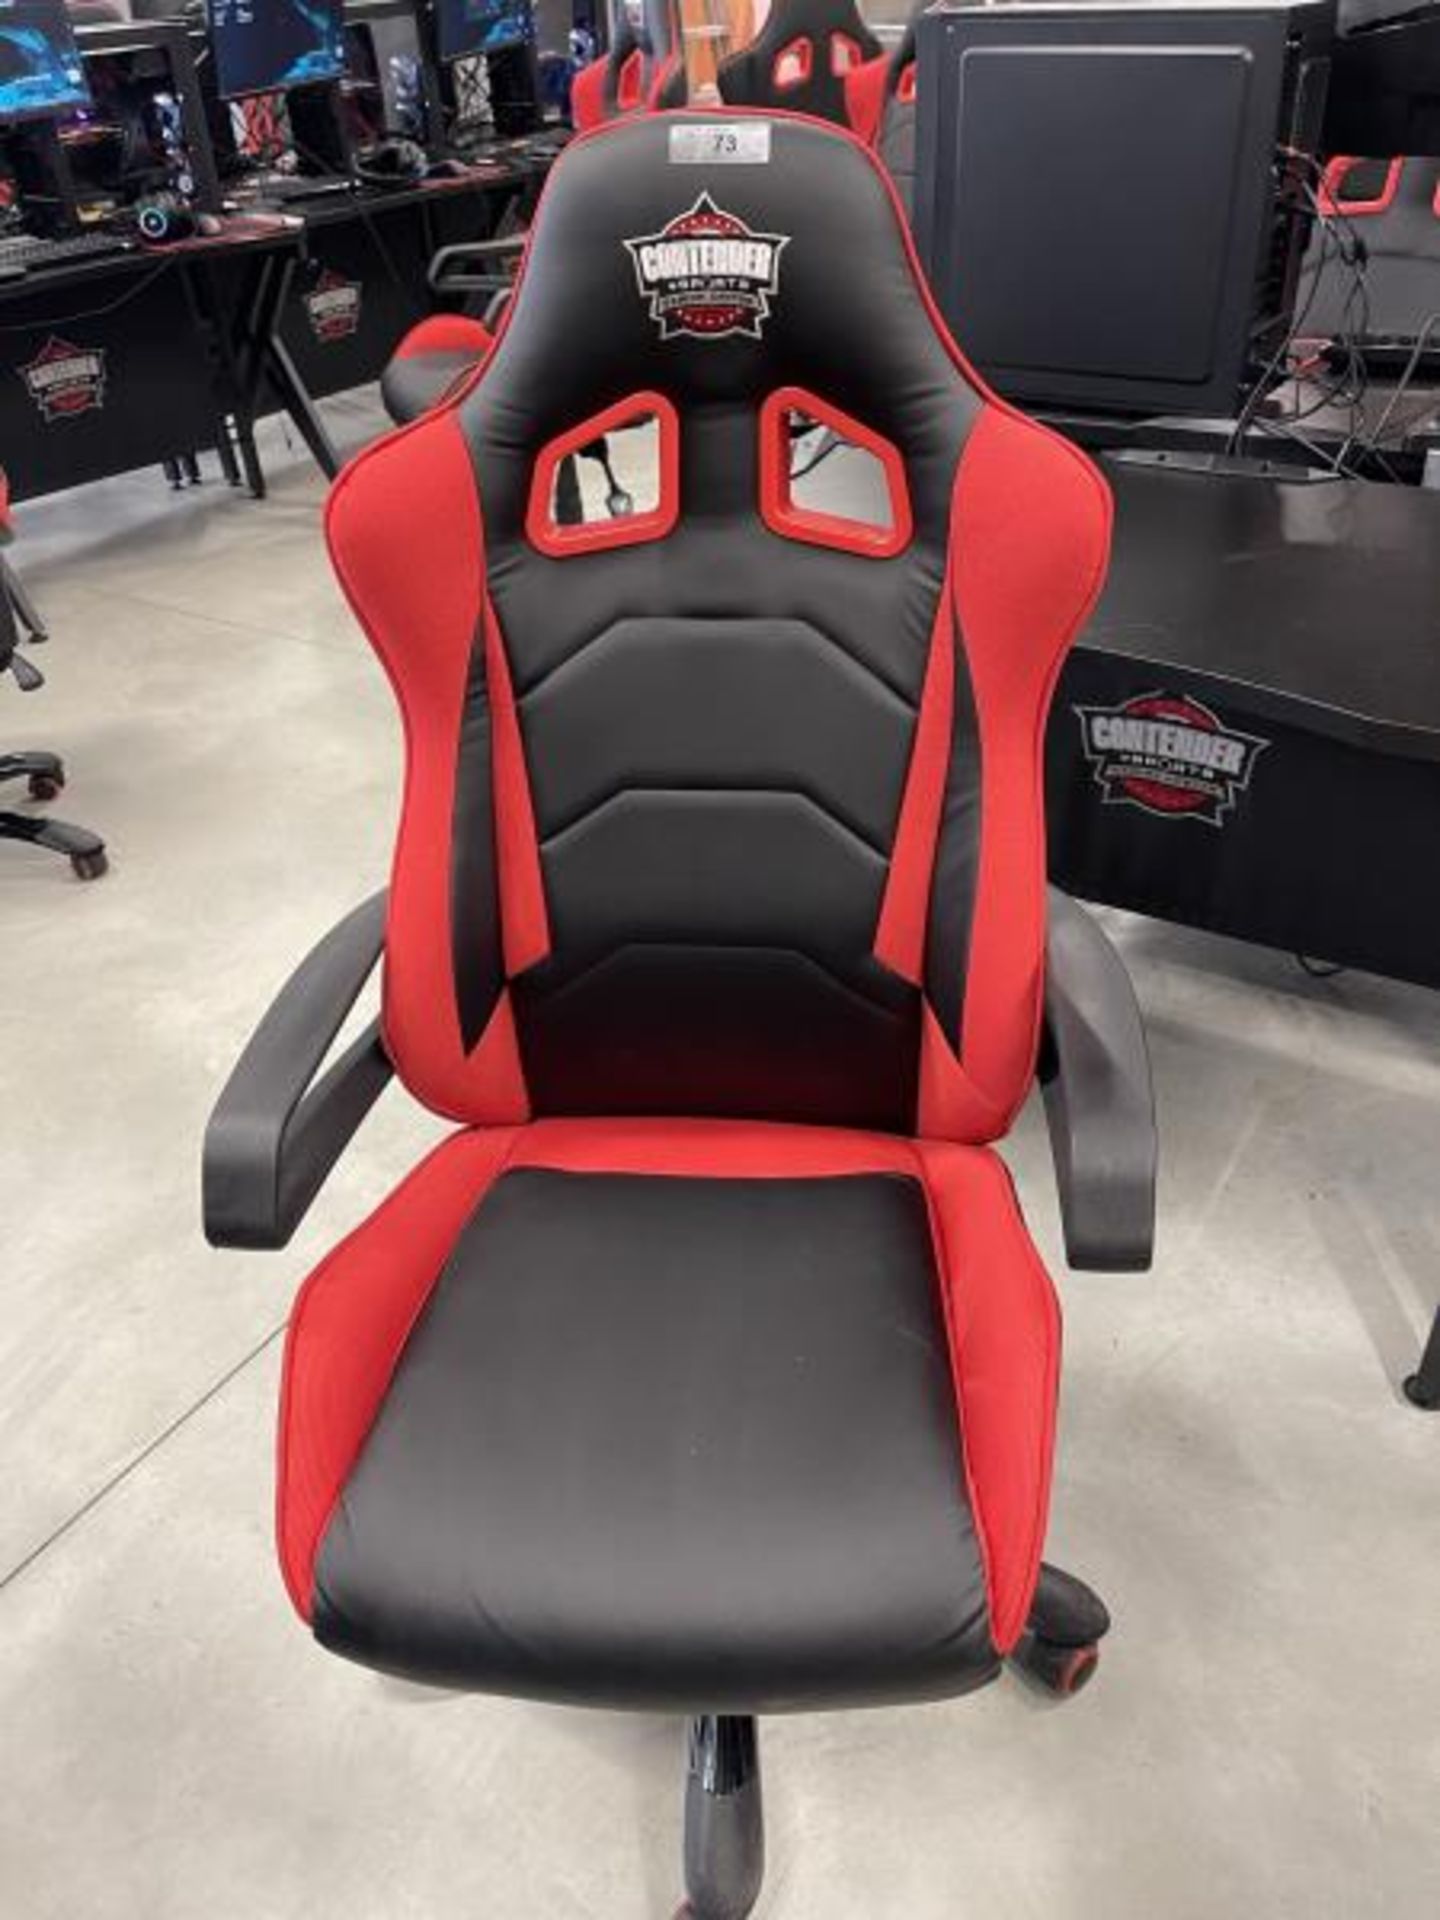 Gaming Desk 40" x 24" w/ Contender Red & Black Gaming Chair - Image 3 of 4